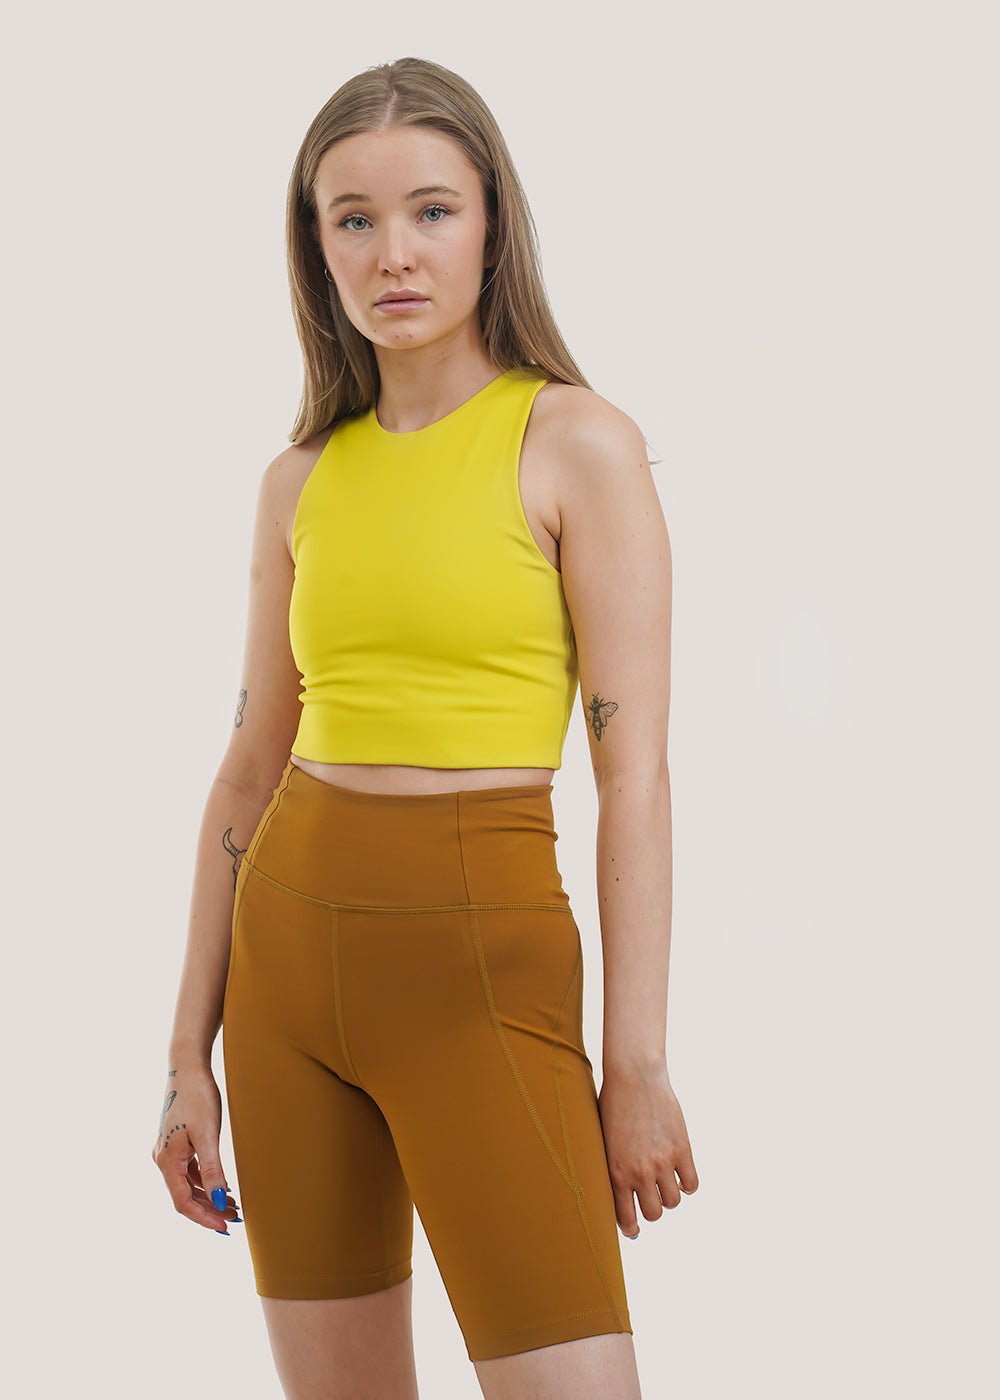 Girlfriend Collective Chartreuse Dylan Bra - New Classics Studios Sustainable Ethical Fashion Canada